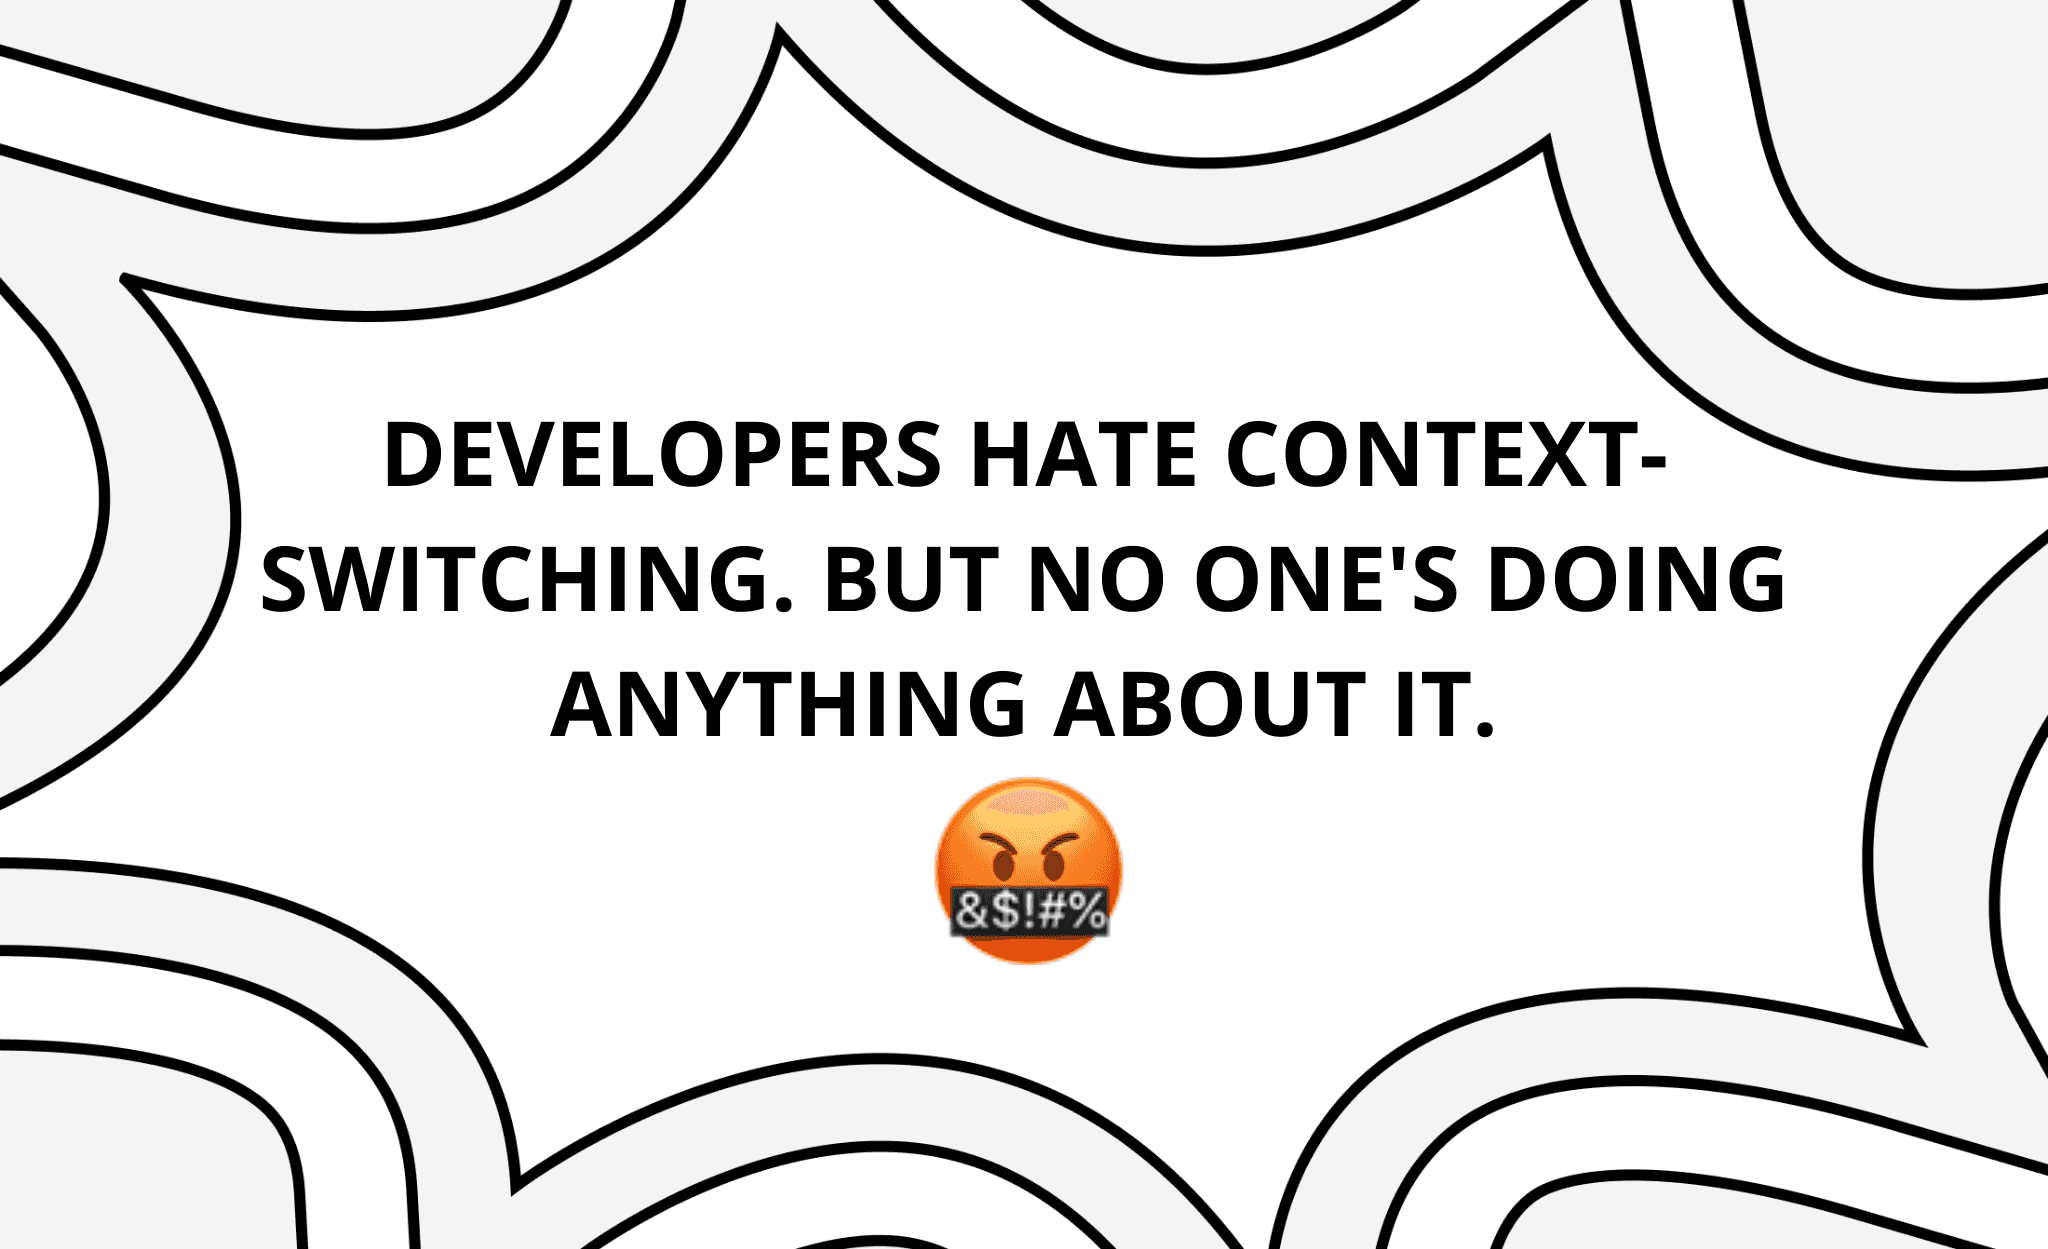 Developers Hate Context-Switching. But No One's Doing Anything About It.